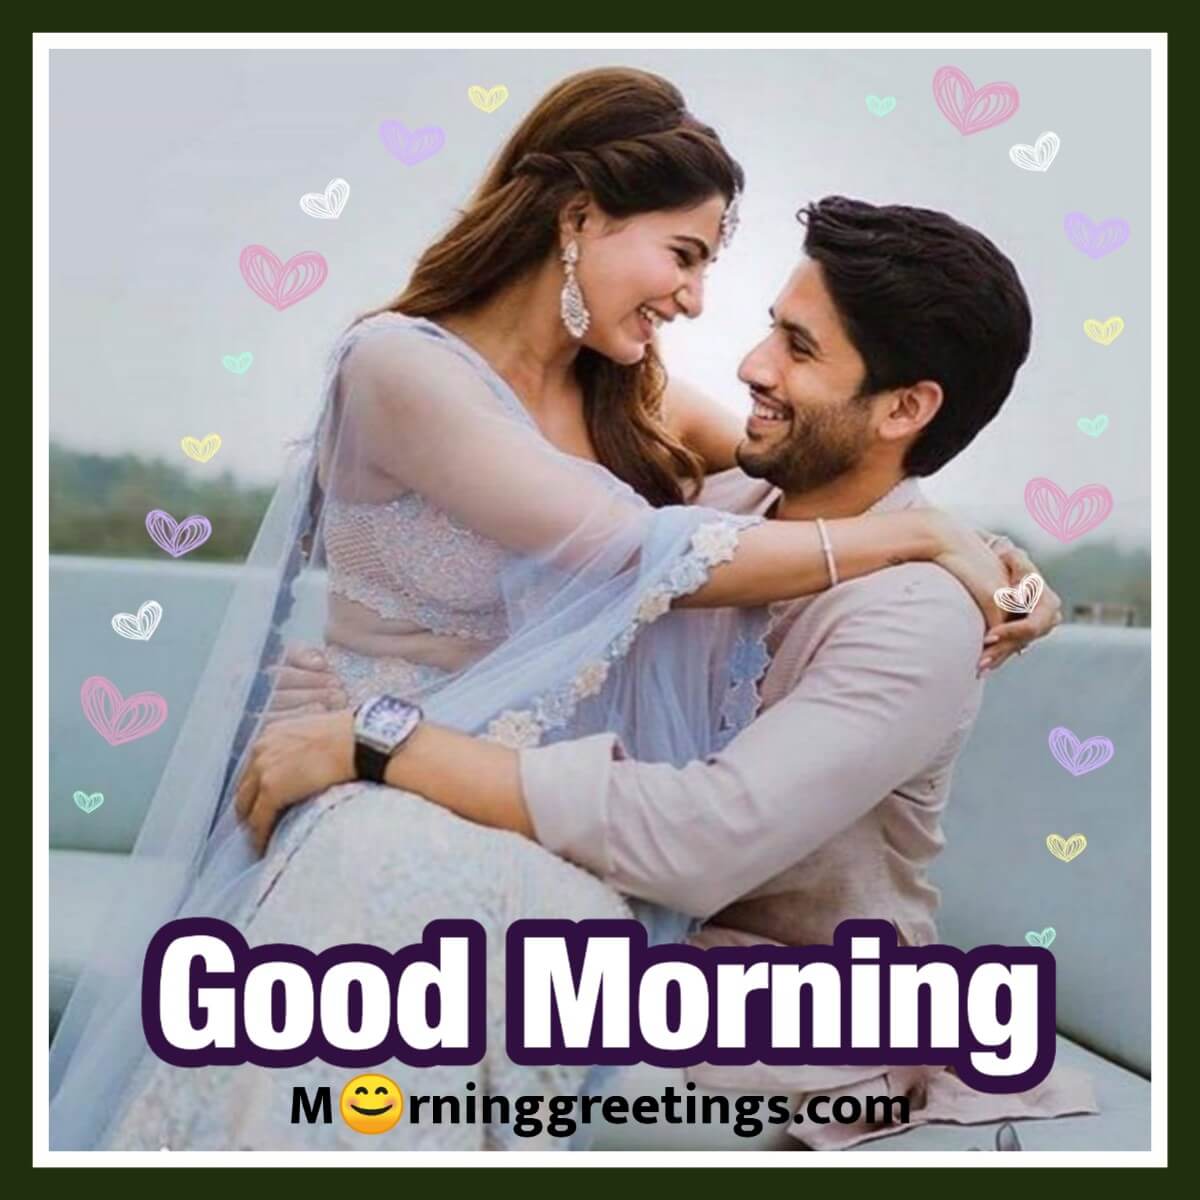 Good Morning Hug Quotes And Messages Cards Morning Greetings Morning Quotes And Wishes Images